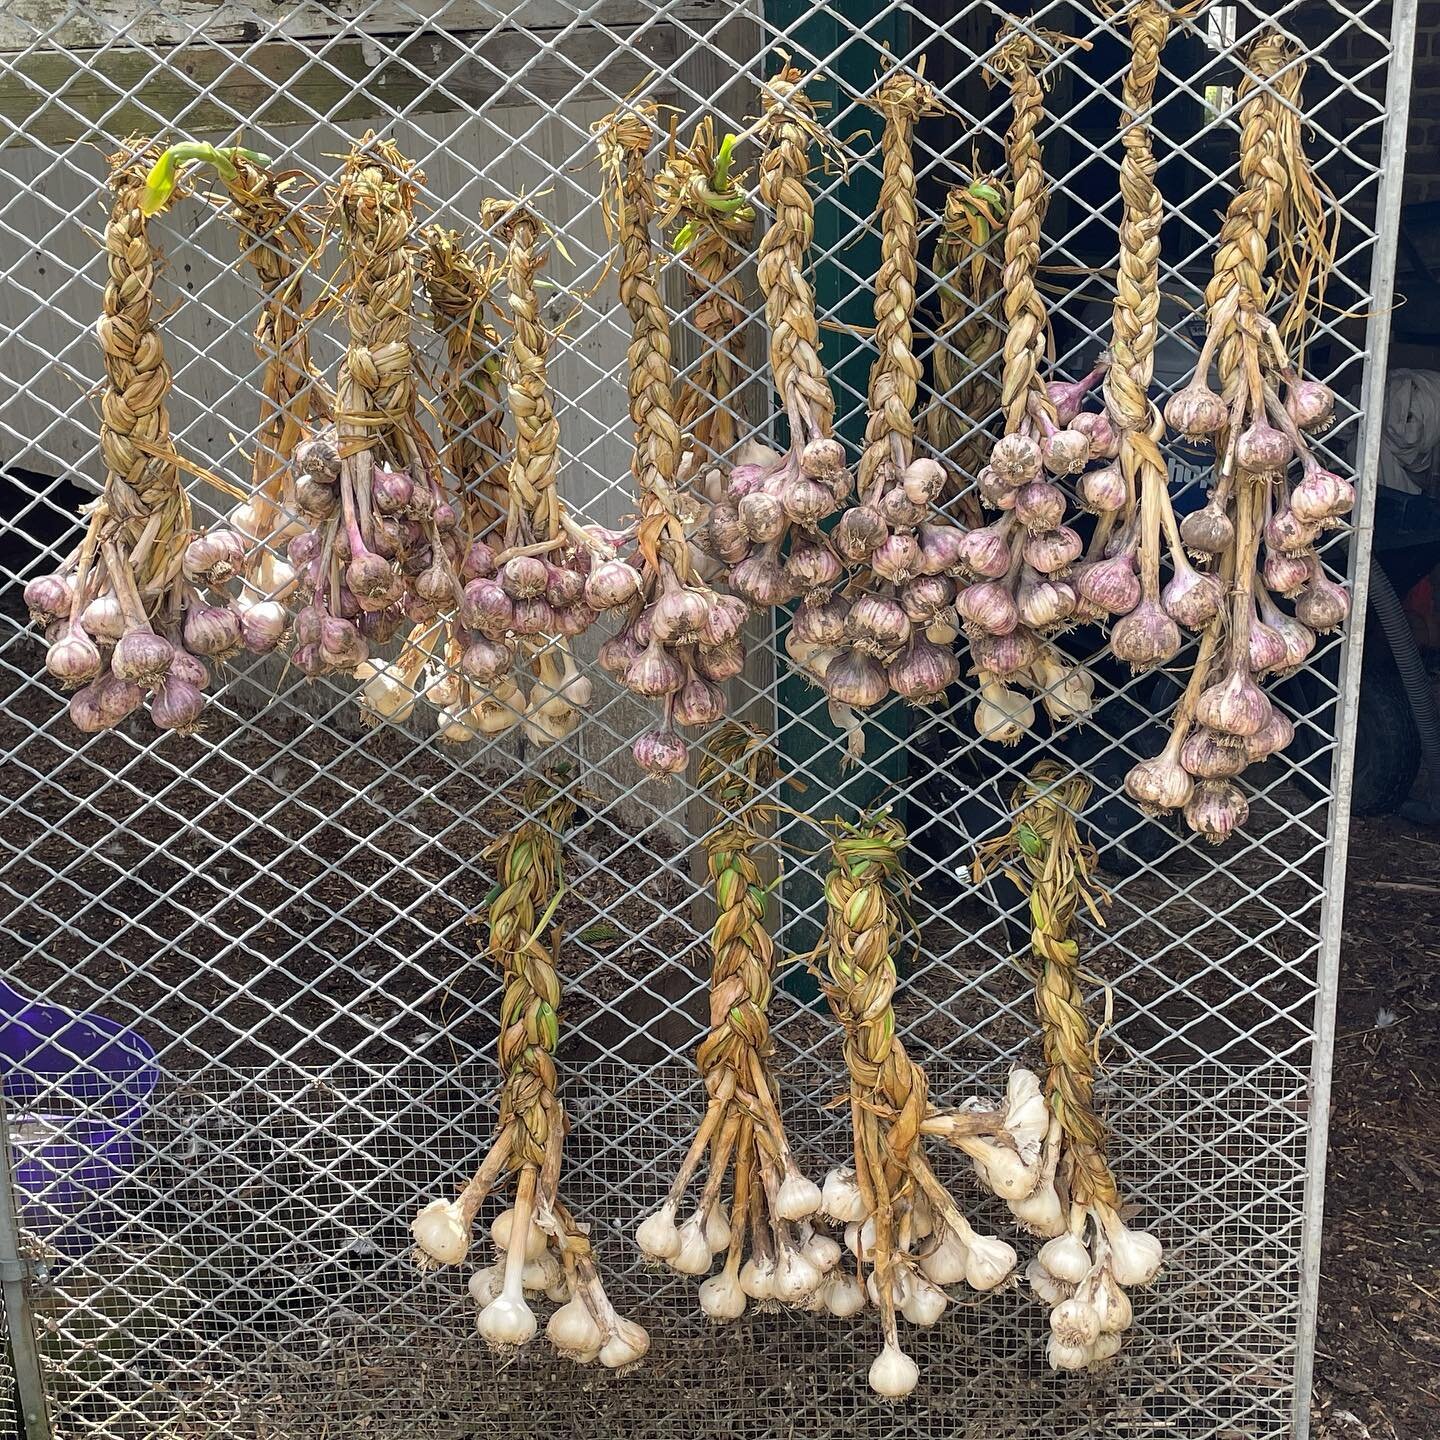 Braided up the garlic today. A large portion will go towards expanding our garlic crop for next year, but we will have a few braids available for purchase after they finish drying some more.